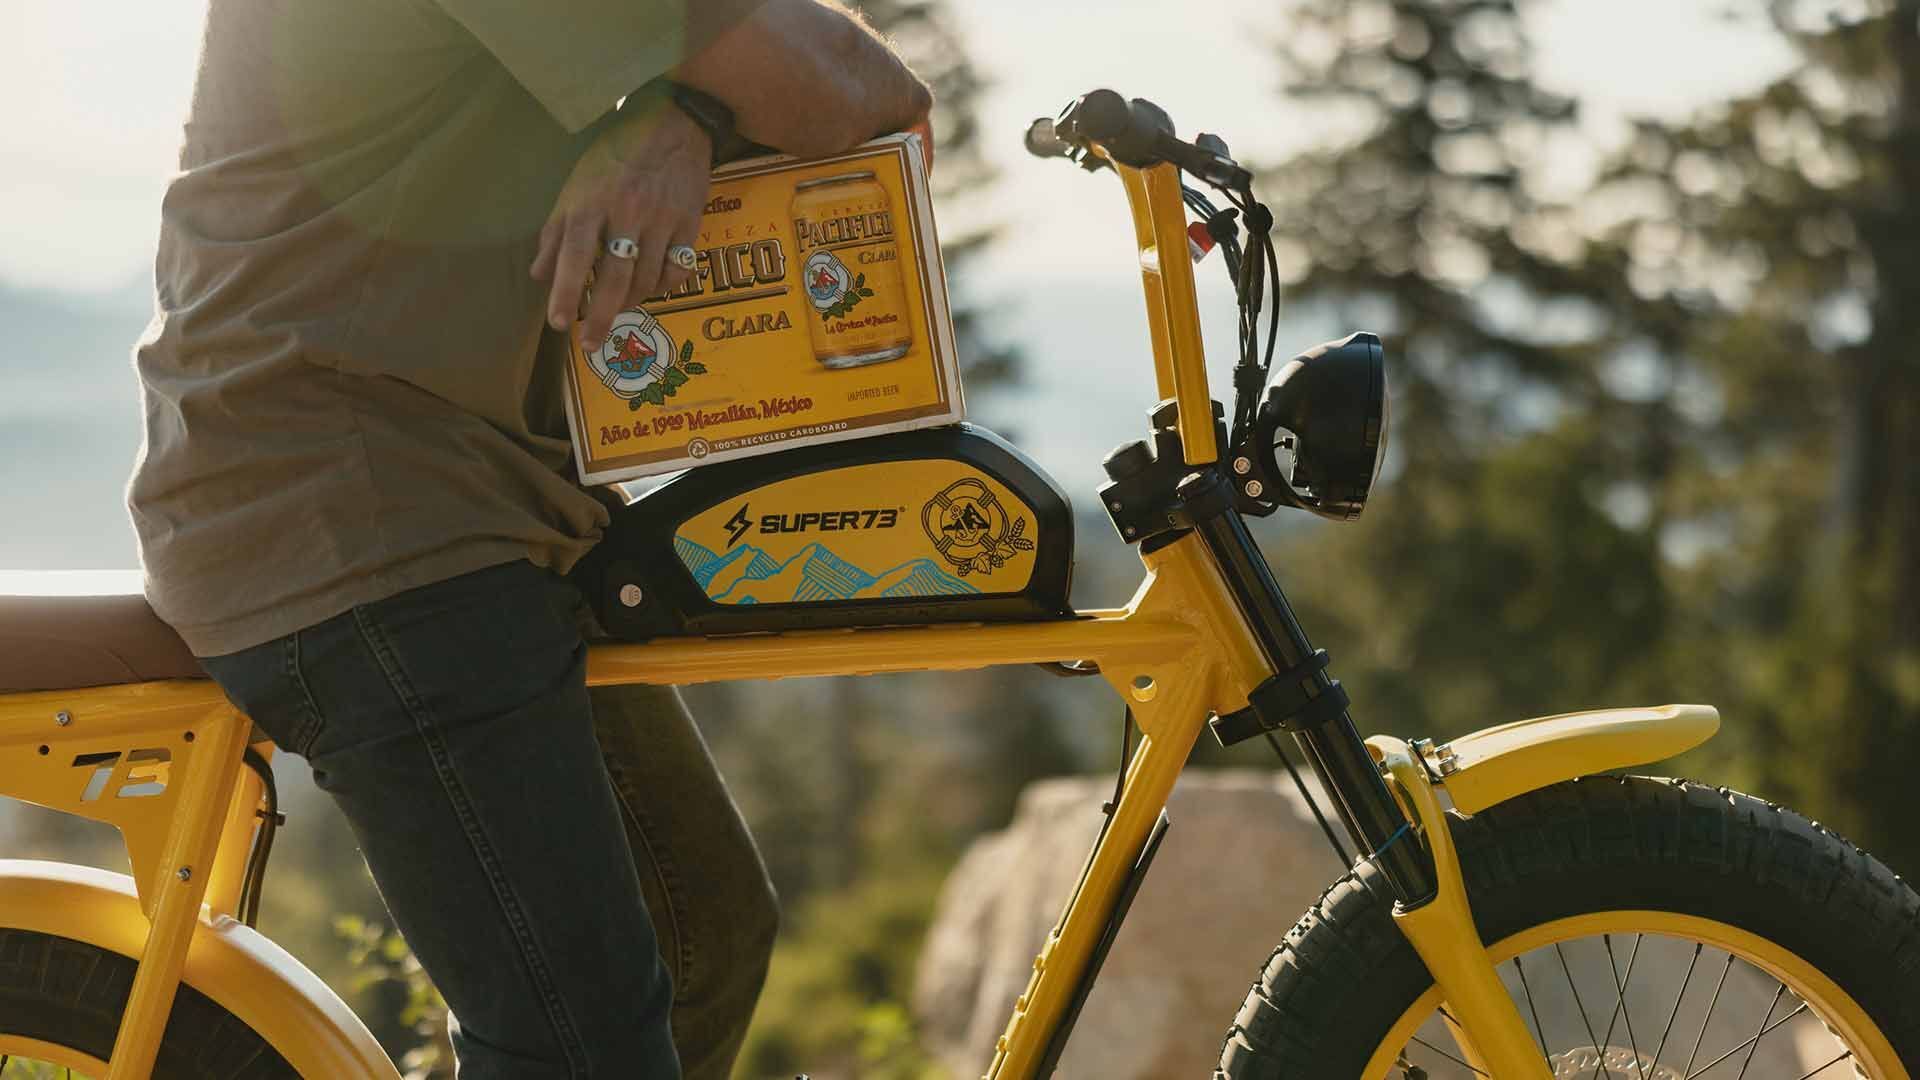 A man sits on a custom Pacifico x SUPER73-S2 bike holding a case of Pacifico beer.